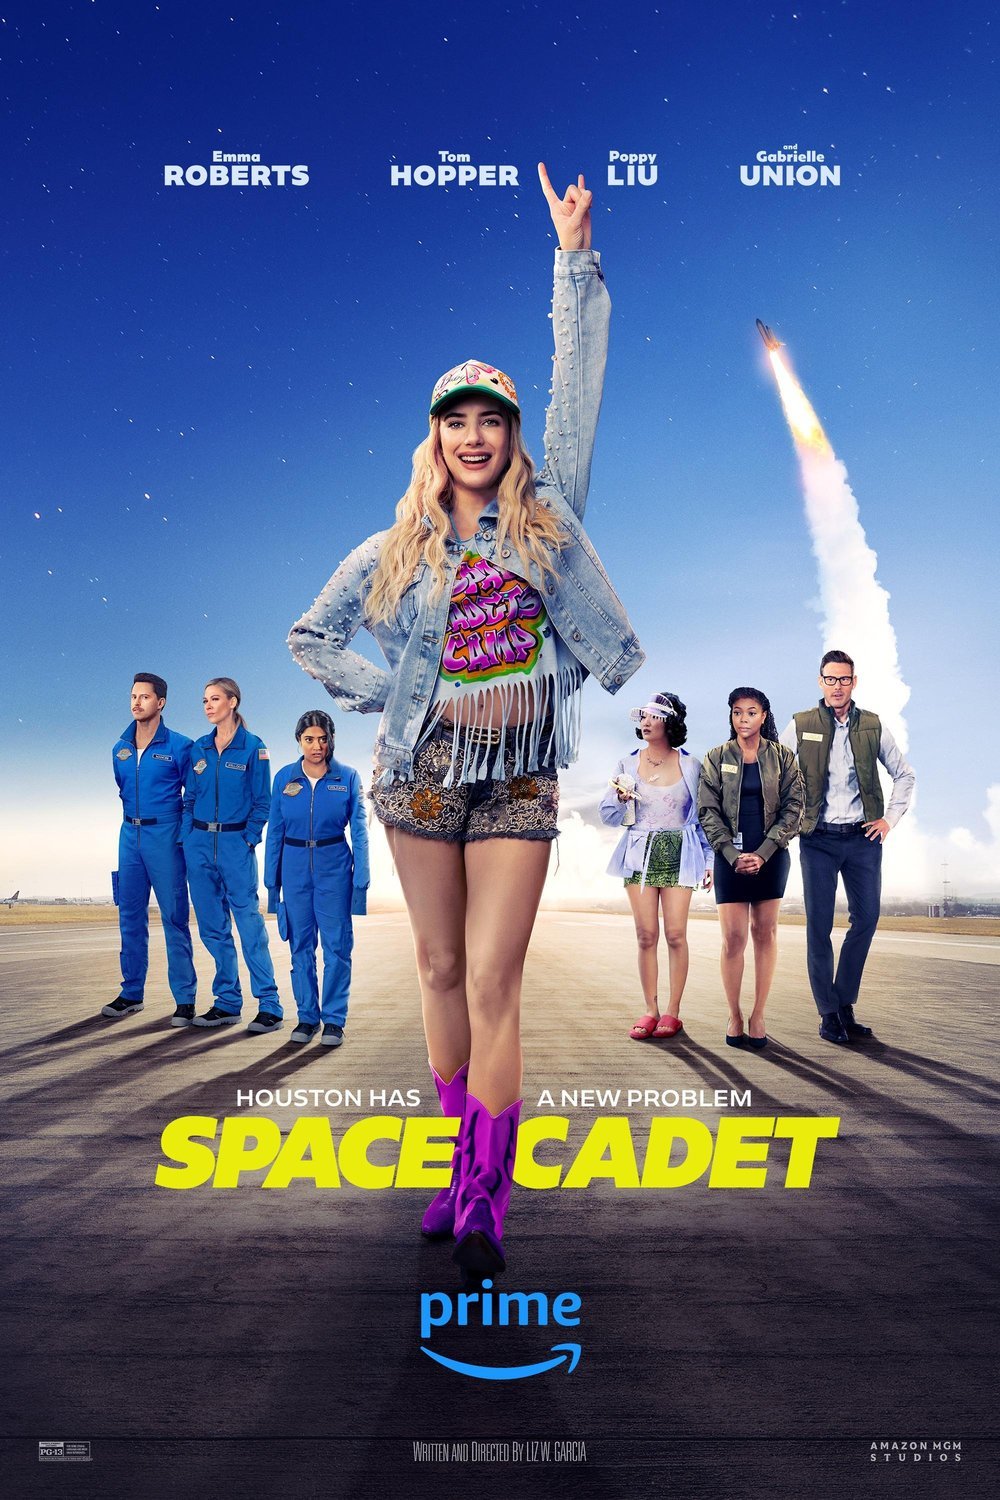 Poster of the movie Space Cadet